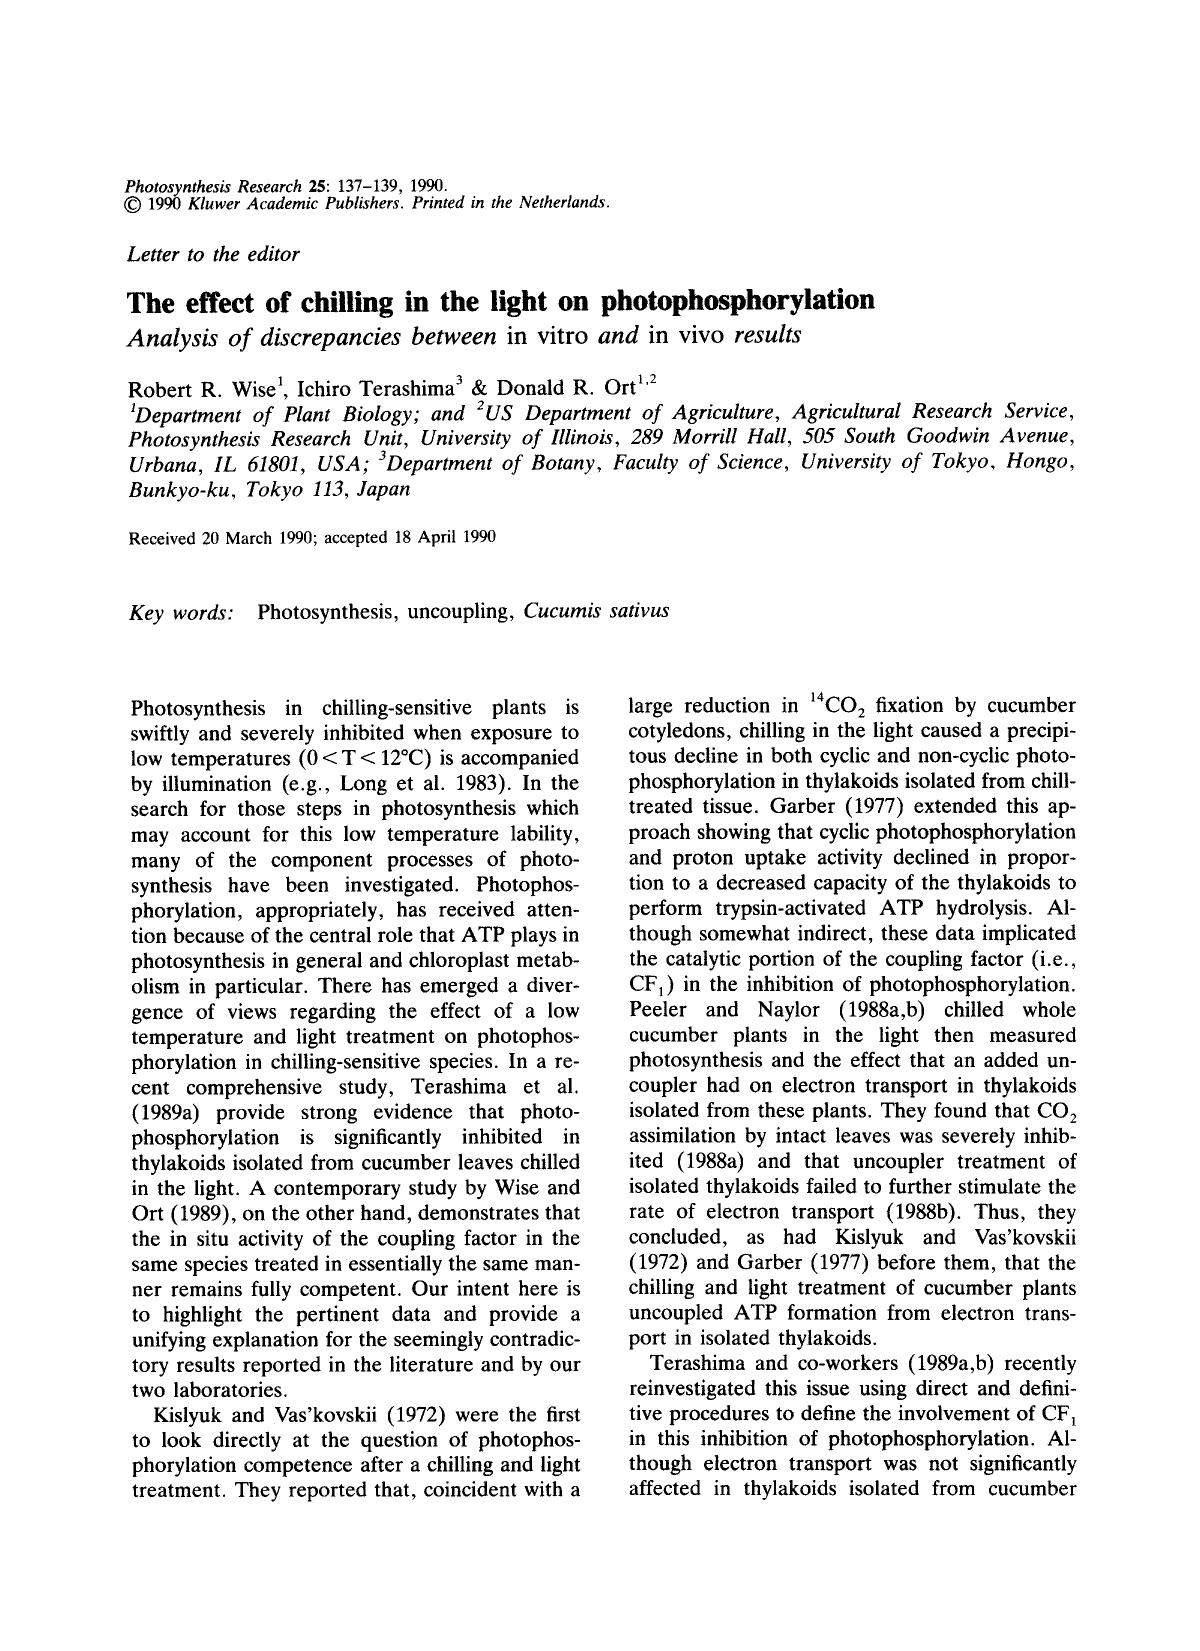 The effect of chilling in the light on photophosphorylation by Unknown